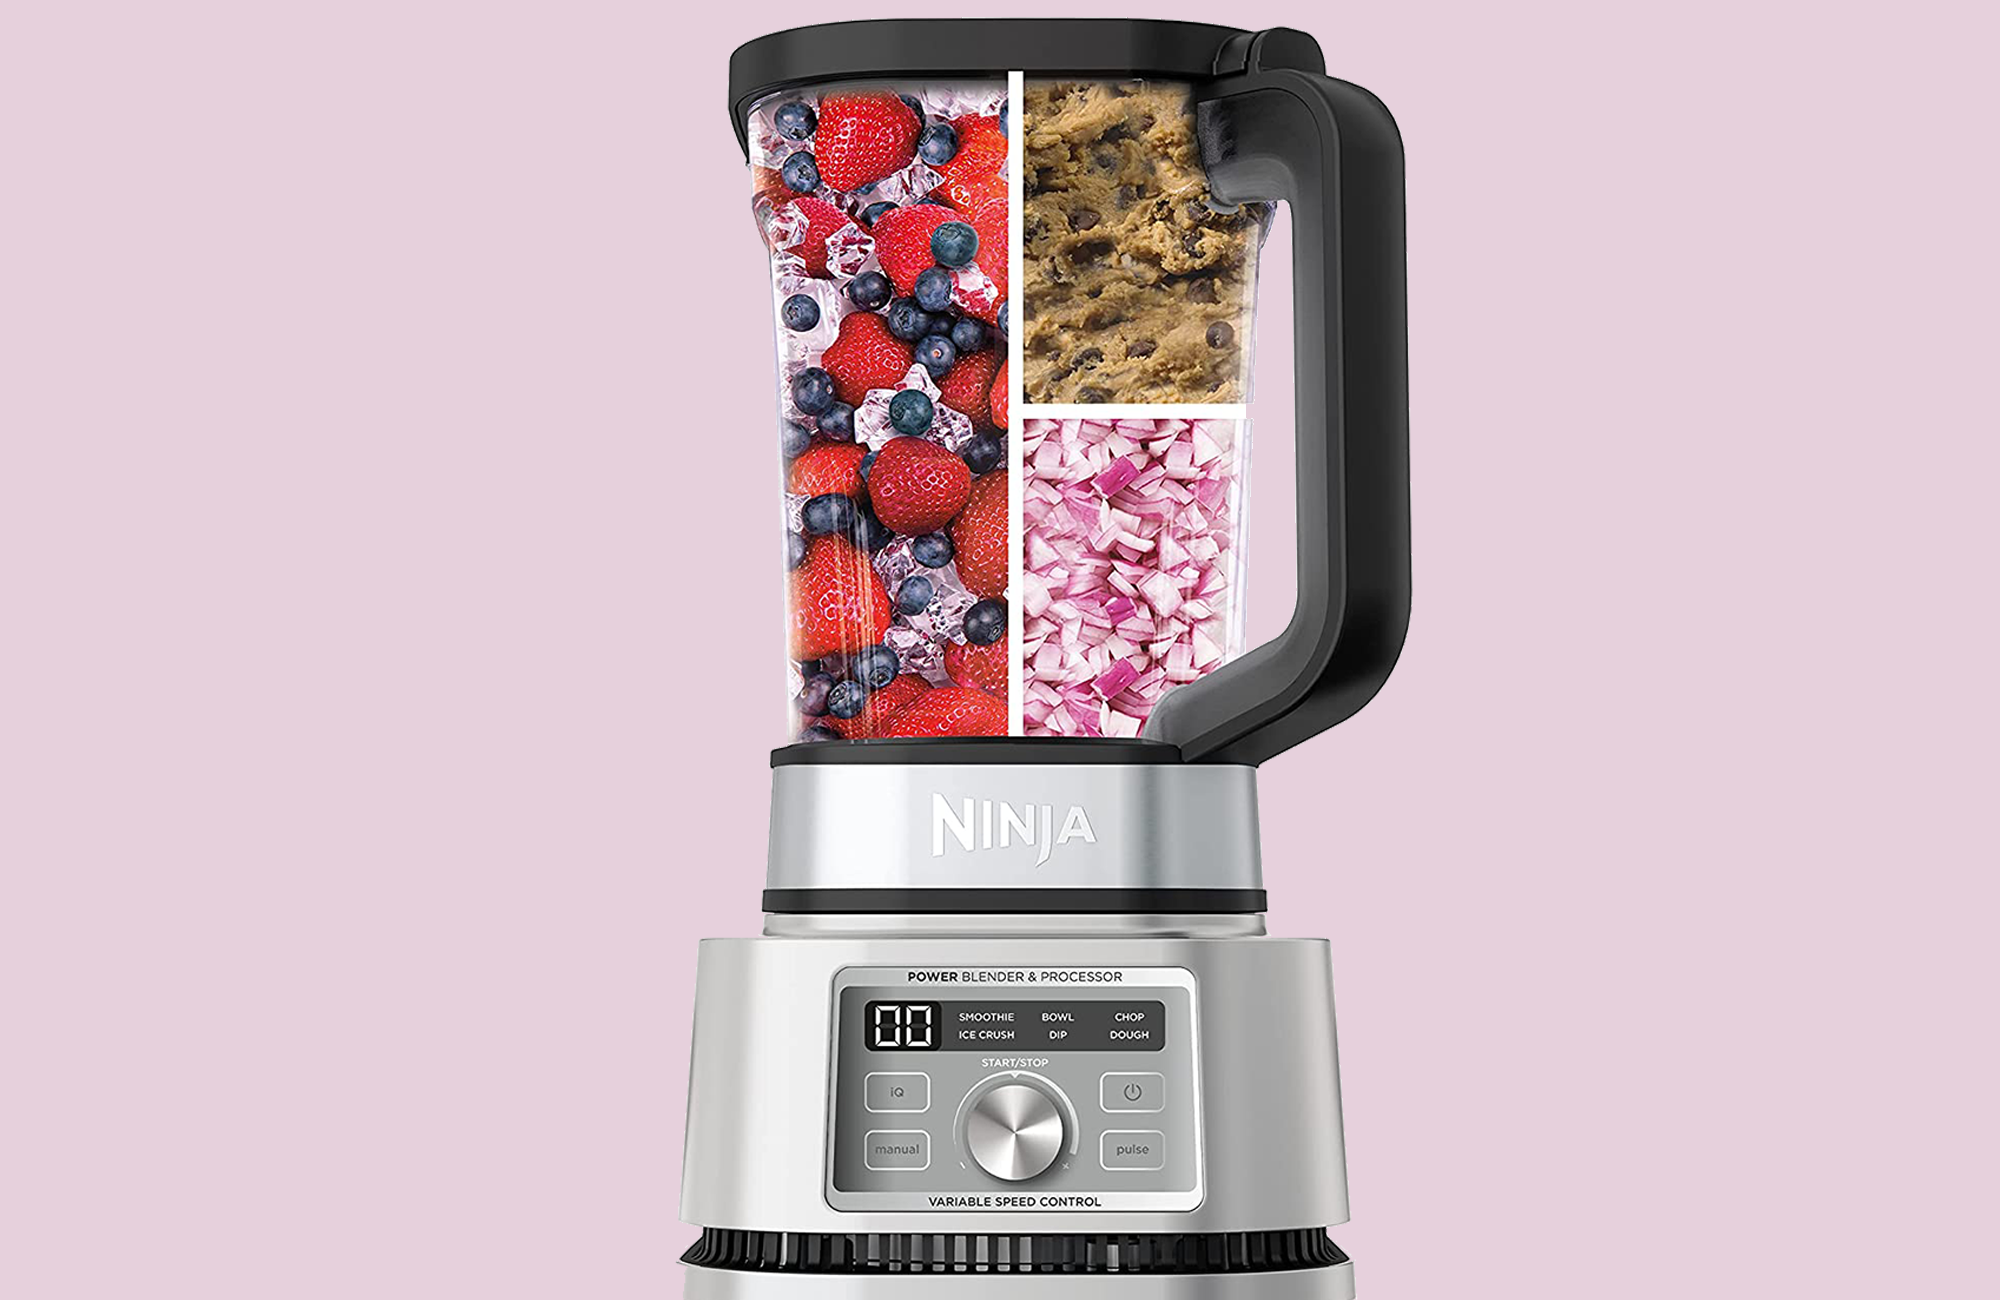 Save $50 on your way to Margaritaville with Ninja blenders from Amazon